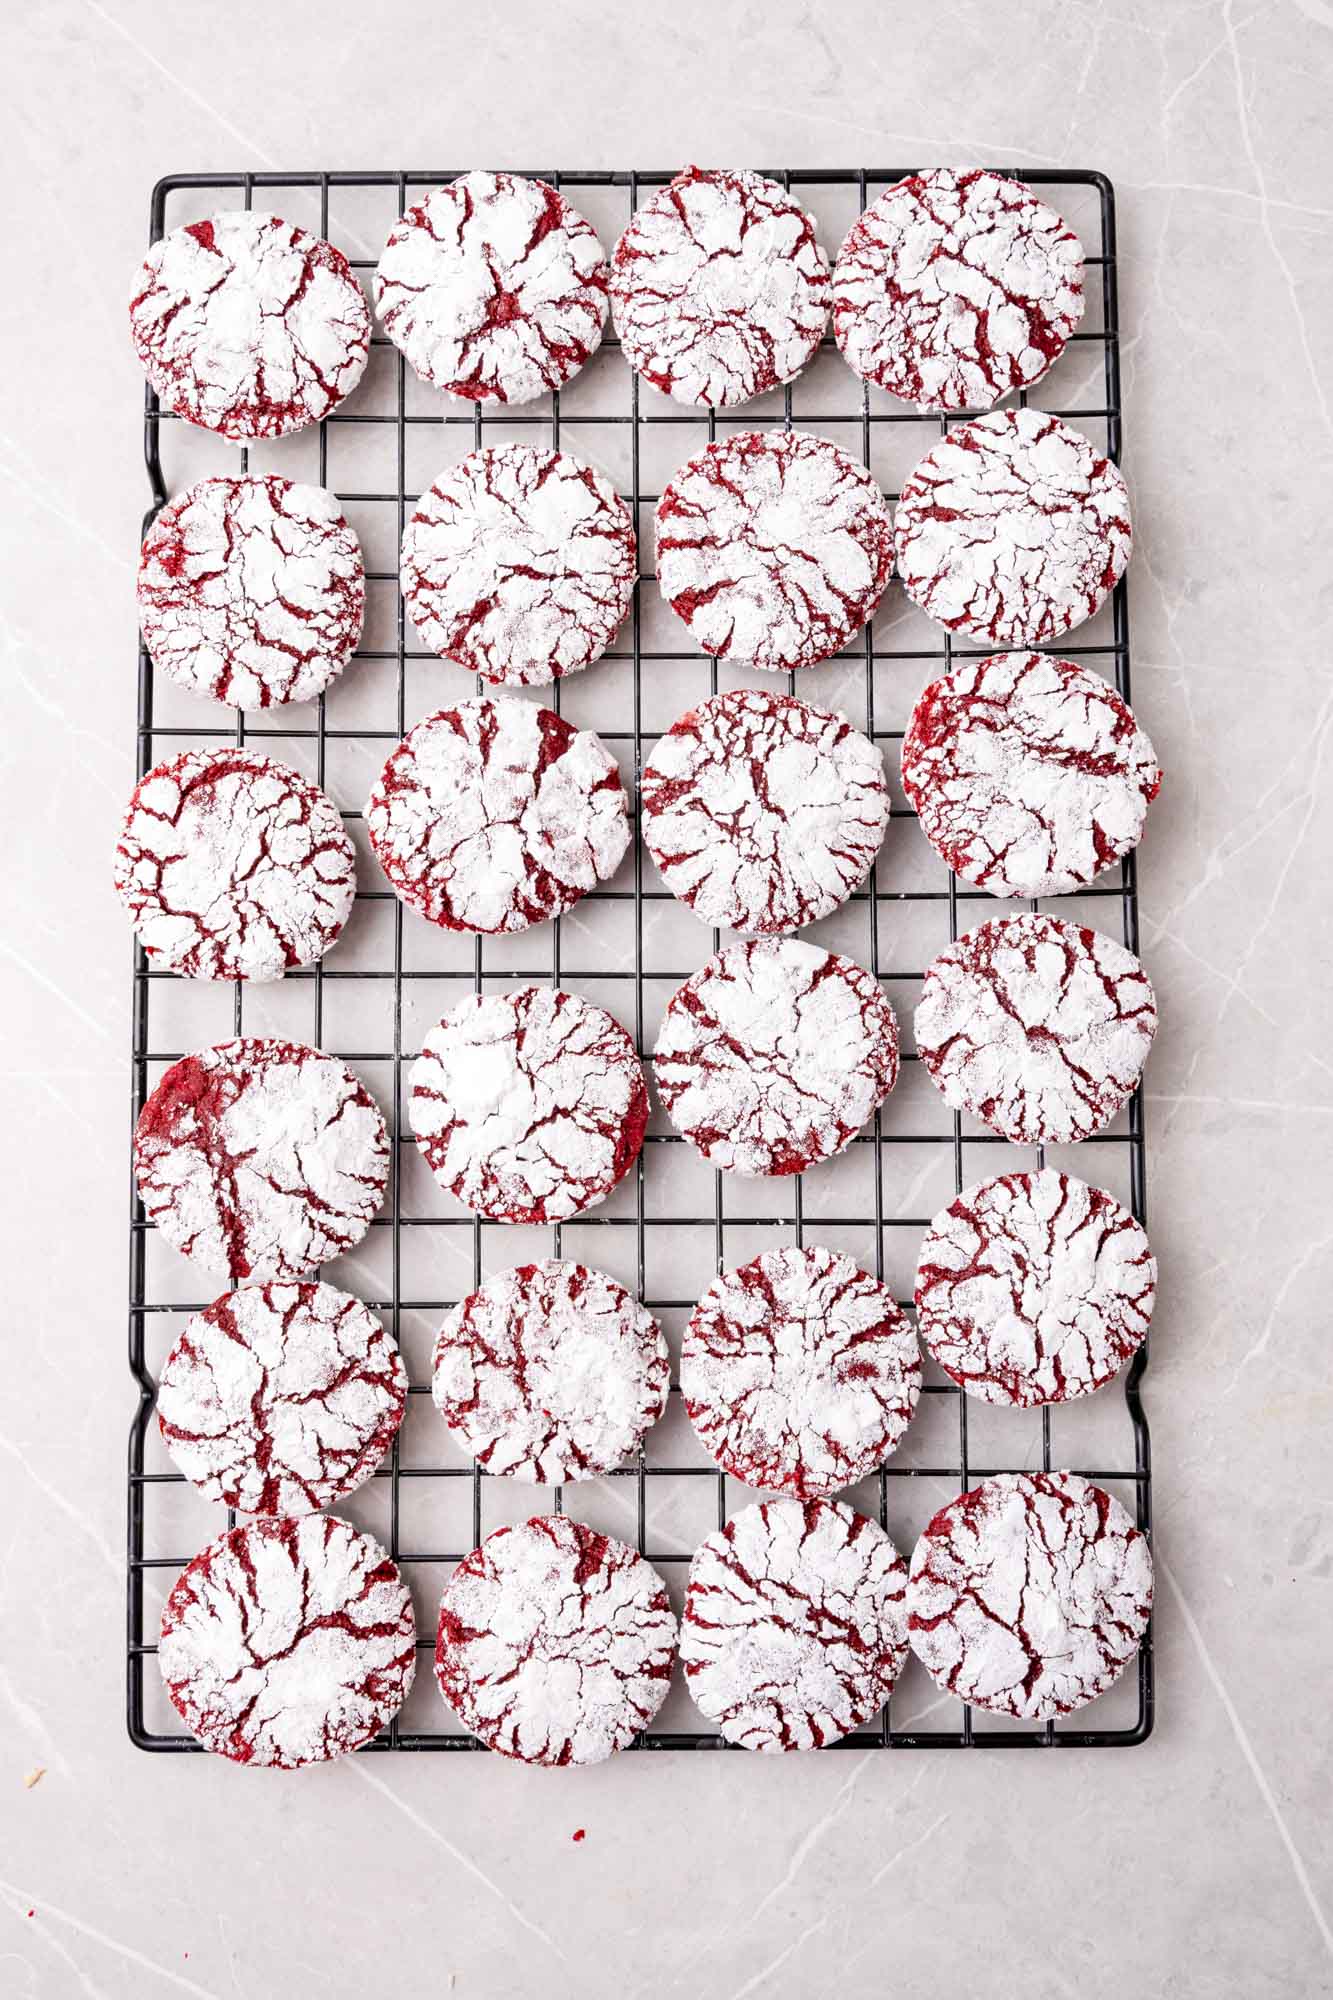 red velvet crinkle cookies on a rectangle cooling rack, viewed from overhead